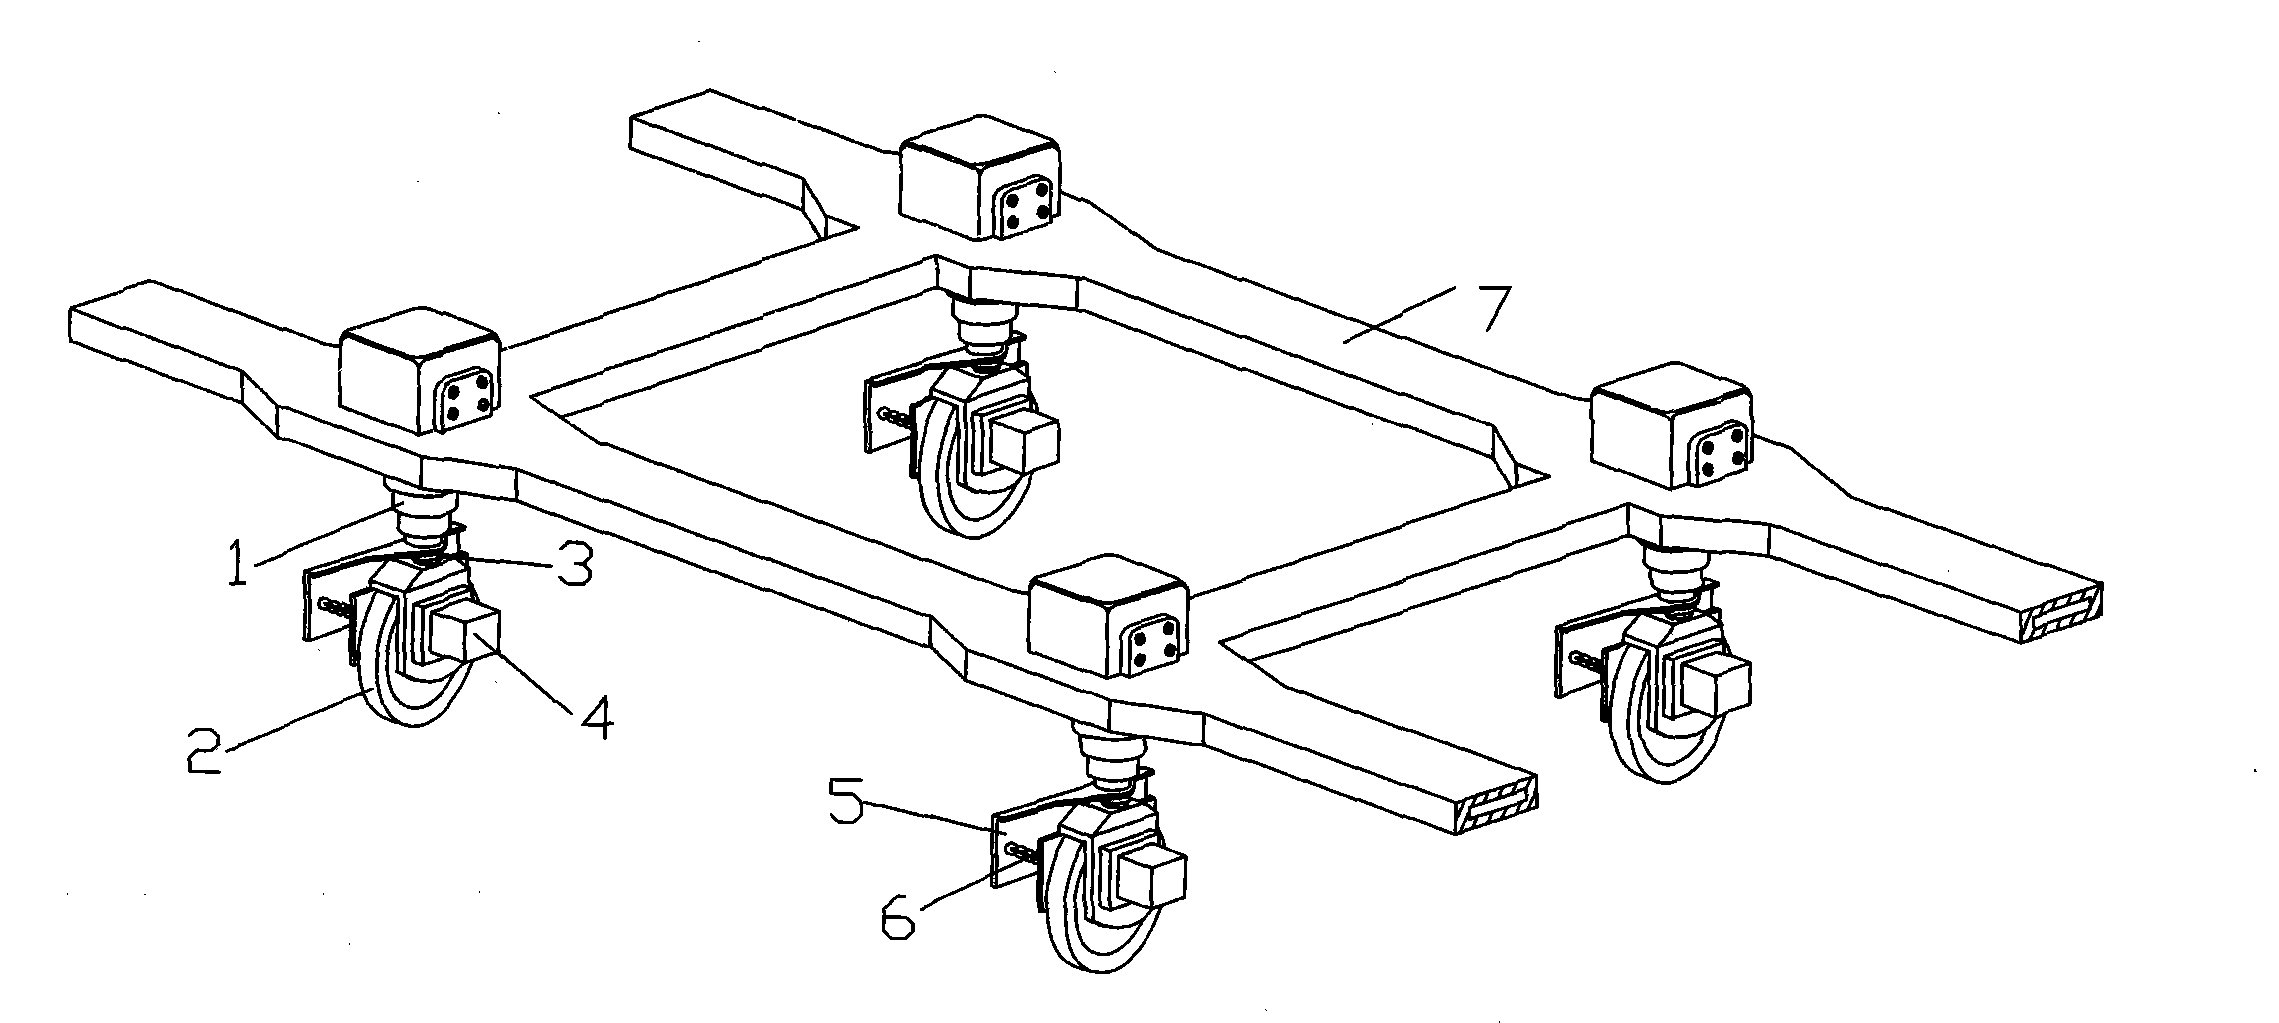 Lateral displacement and pivot steering system of automobile